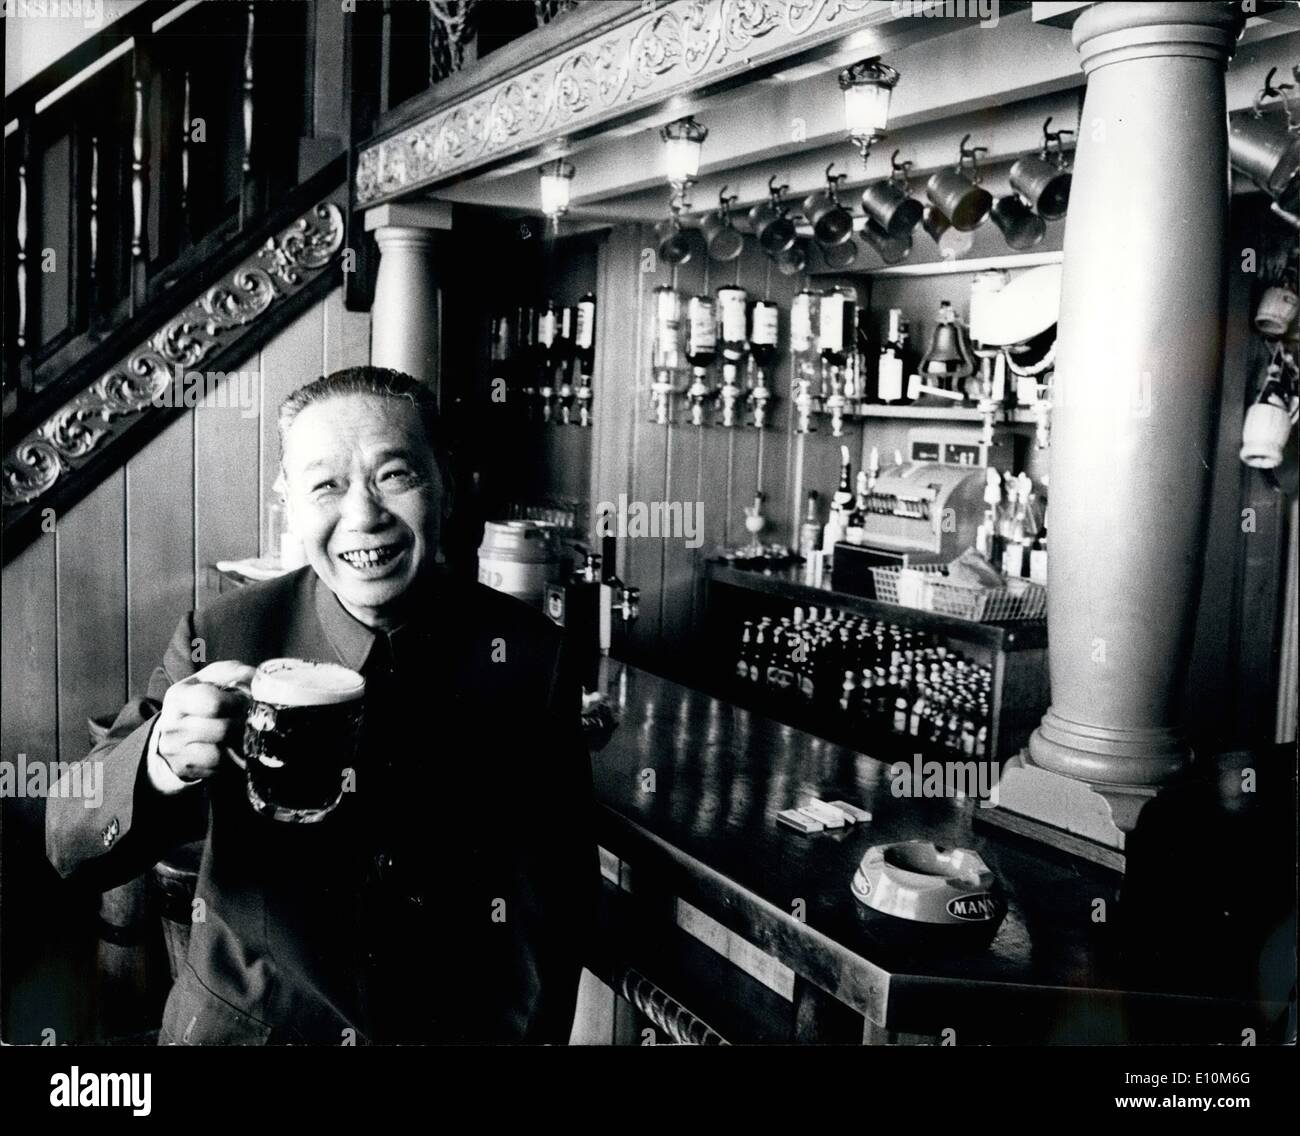 Jun. 06, 1973 - Mao's Foreign Minister downs a British Pint. Photo shows Sightseeing in London after two days of talks with British Ministers, Chi Peng-fei, the Chinese Foreign Minister, relishing a pint of beer bought for him by photographers at the Trafalgar Tavern, Greenwich, yesterday.He had just visited the National Maritime Museum. Stock Photo